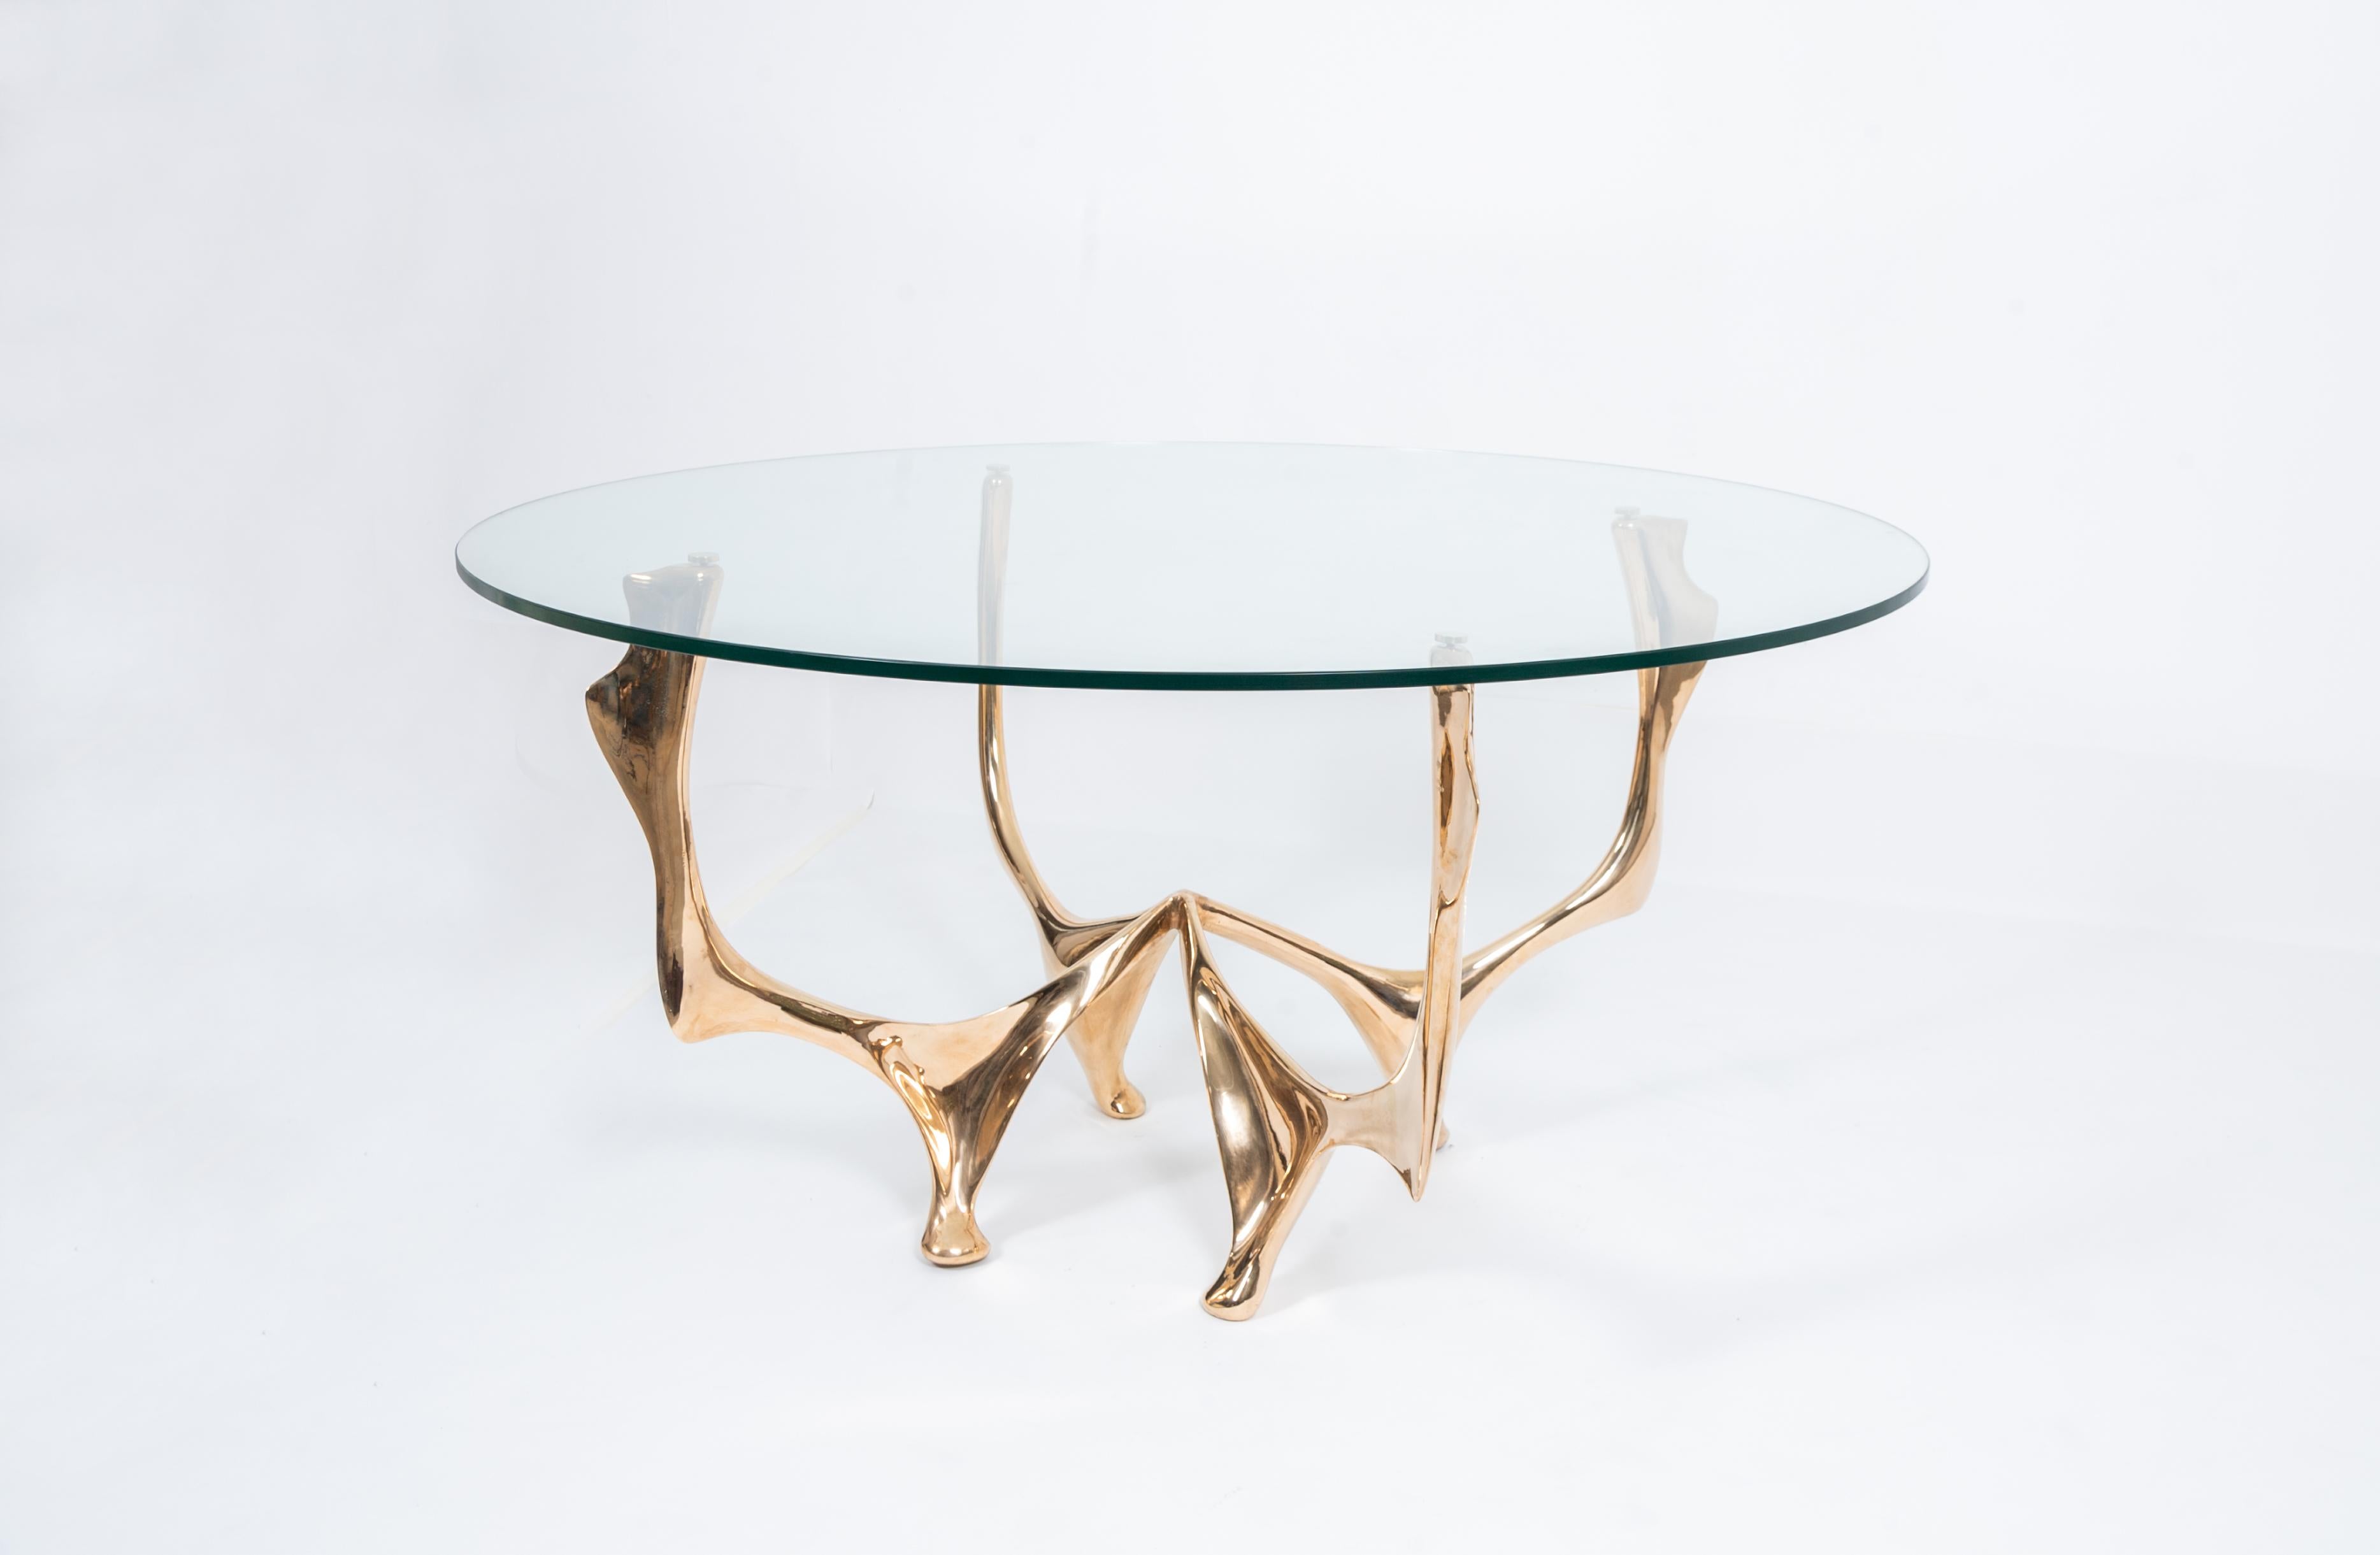 Elan Dining Table by Pierre Salagnac 
Material: Bronze golden polish, glass top
Dimensions: H 74 x Ø 150 cm
Year: 2023
Limited edition: numbered 1/8, signed

Revealing the organic curves of nature in the metal block with great talent, Pierre